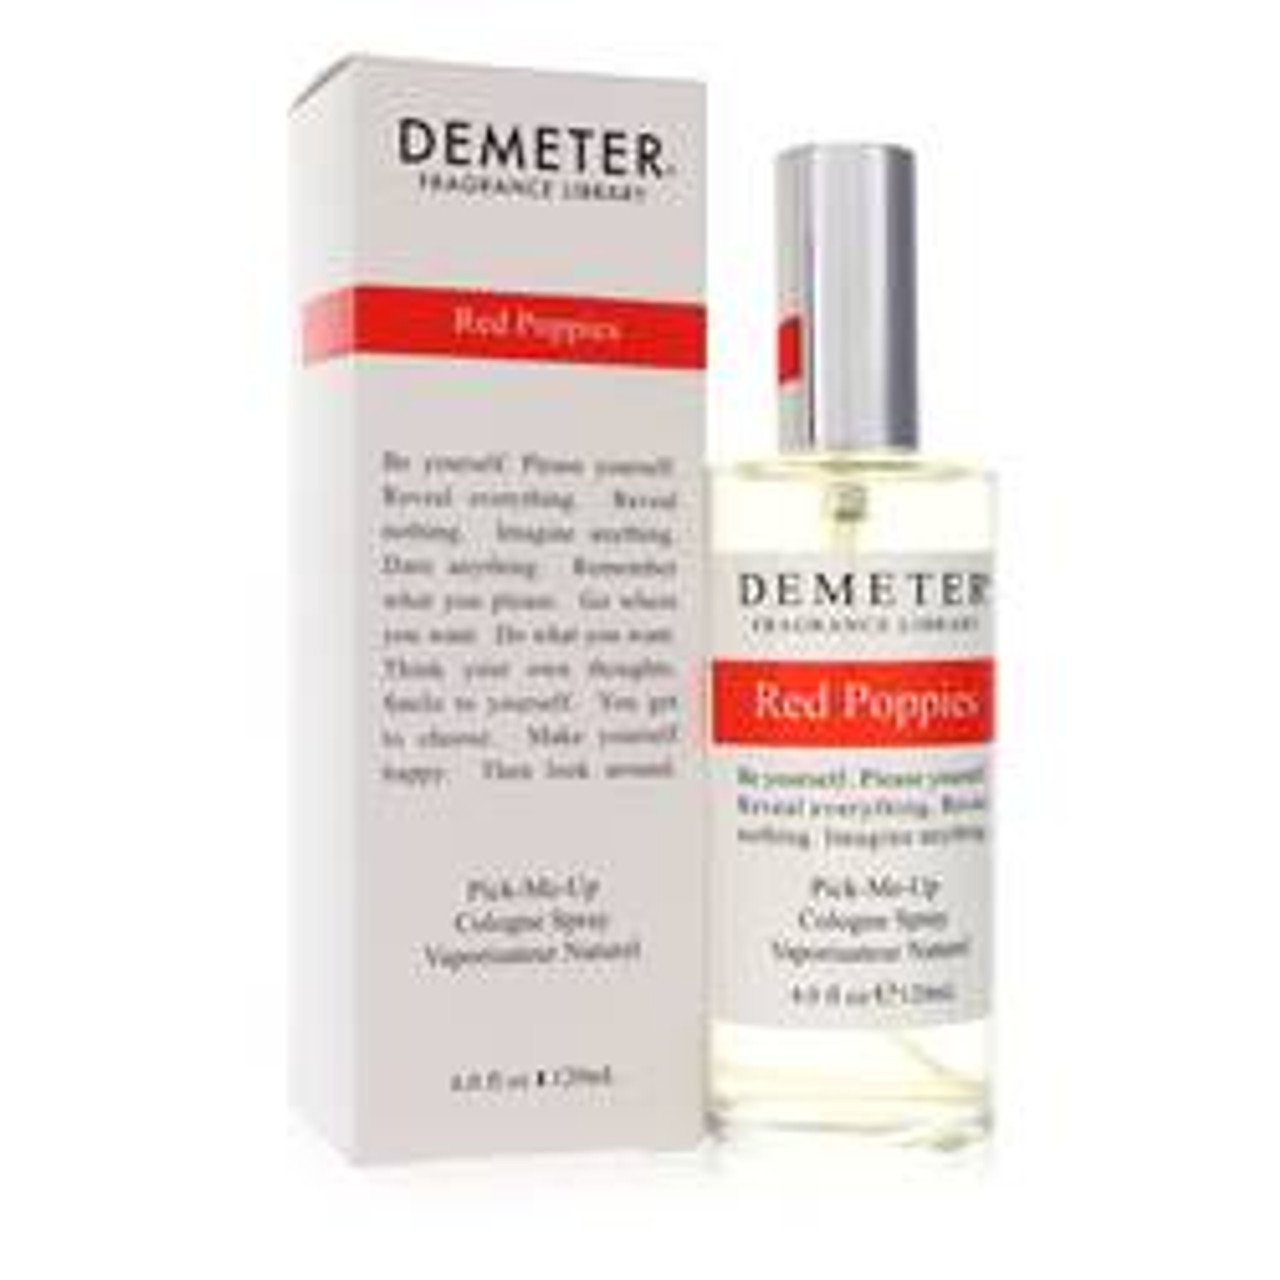 Demeter Red Poppies Perfume By Demeter Cologne Spray 4 oz for Women - [From 79.50 - Choose pk Qty ] - *Ships from Miami